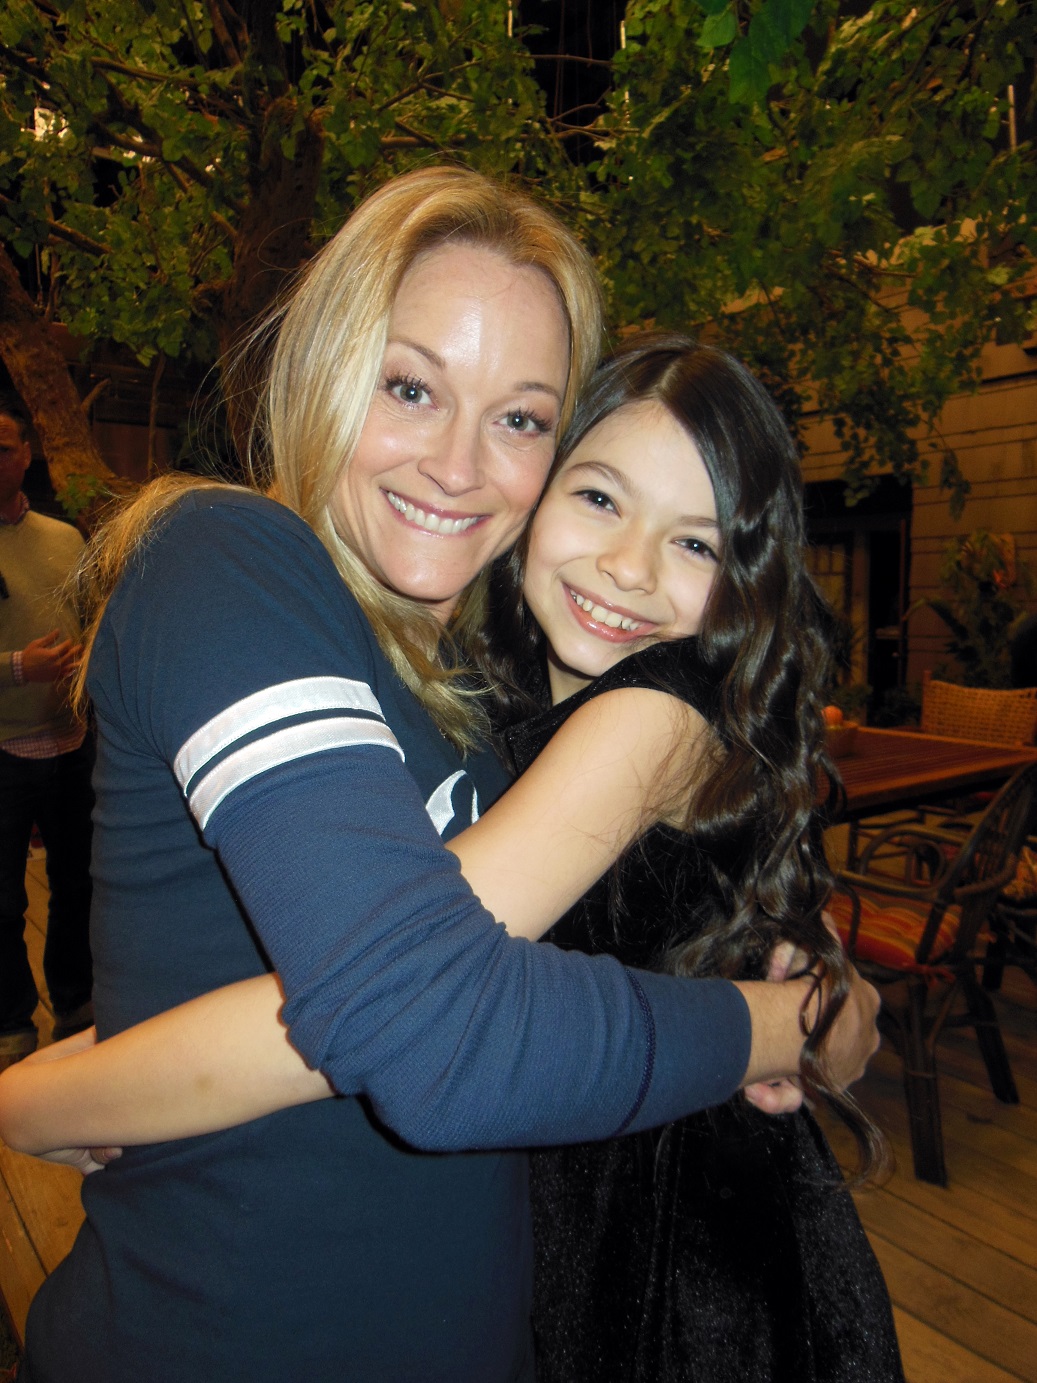 Nikki Hahn with Teri Polo (reuniting) on set of The Fosters 2013 - role of Young Callie